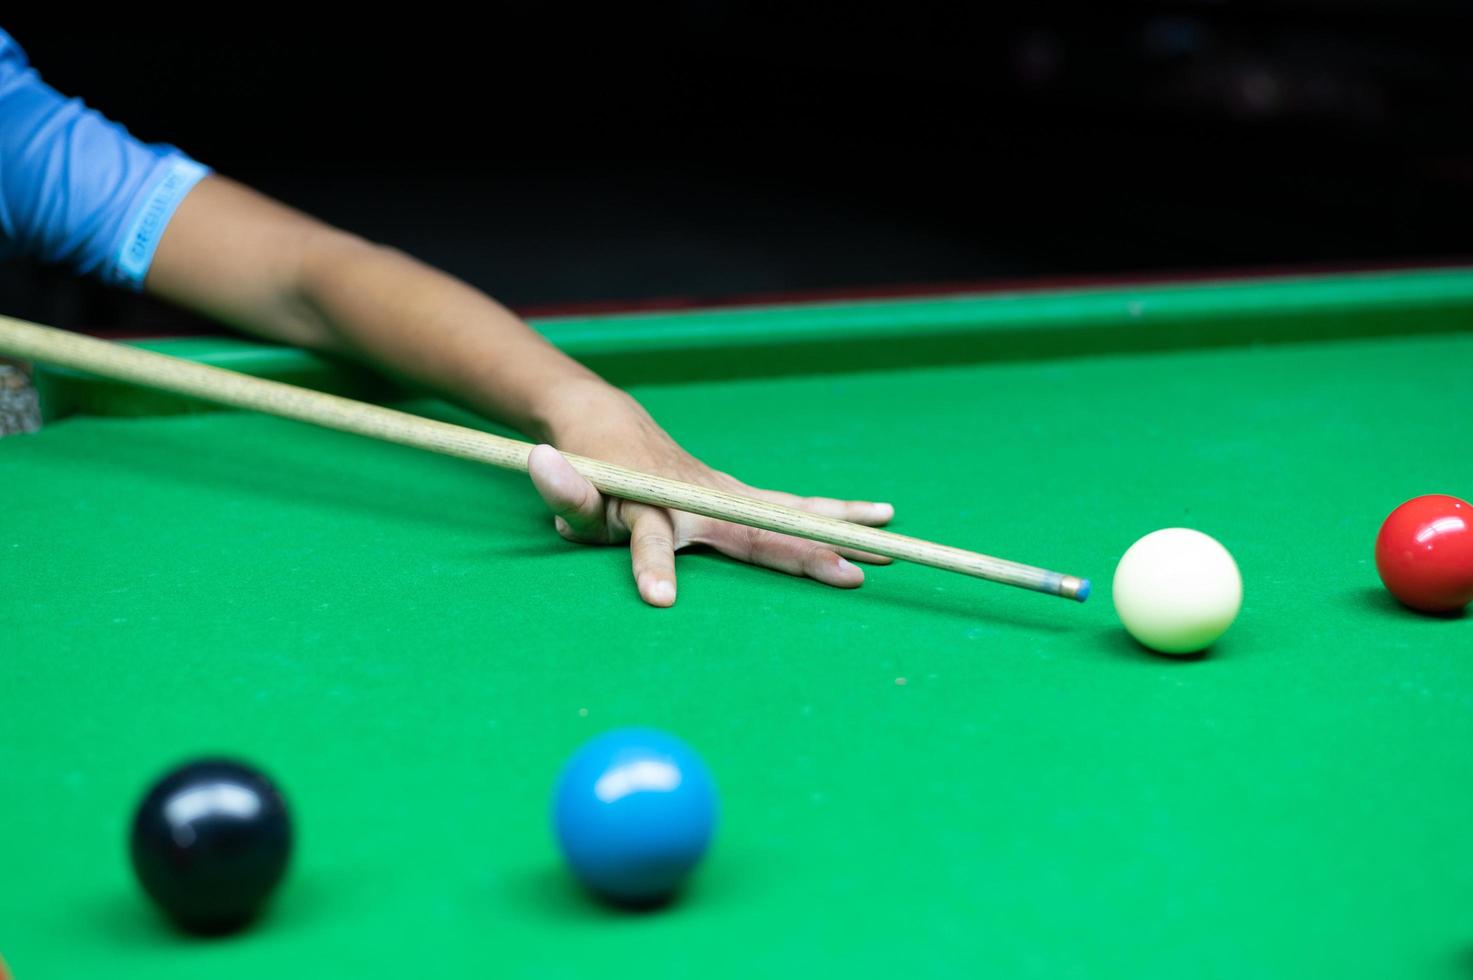 An Asian woman playing snooker. photo